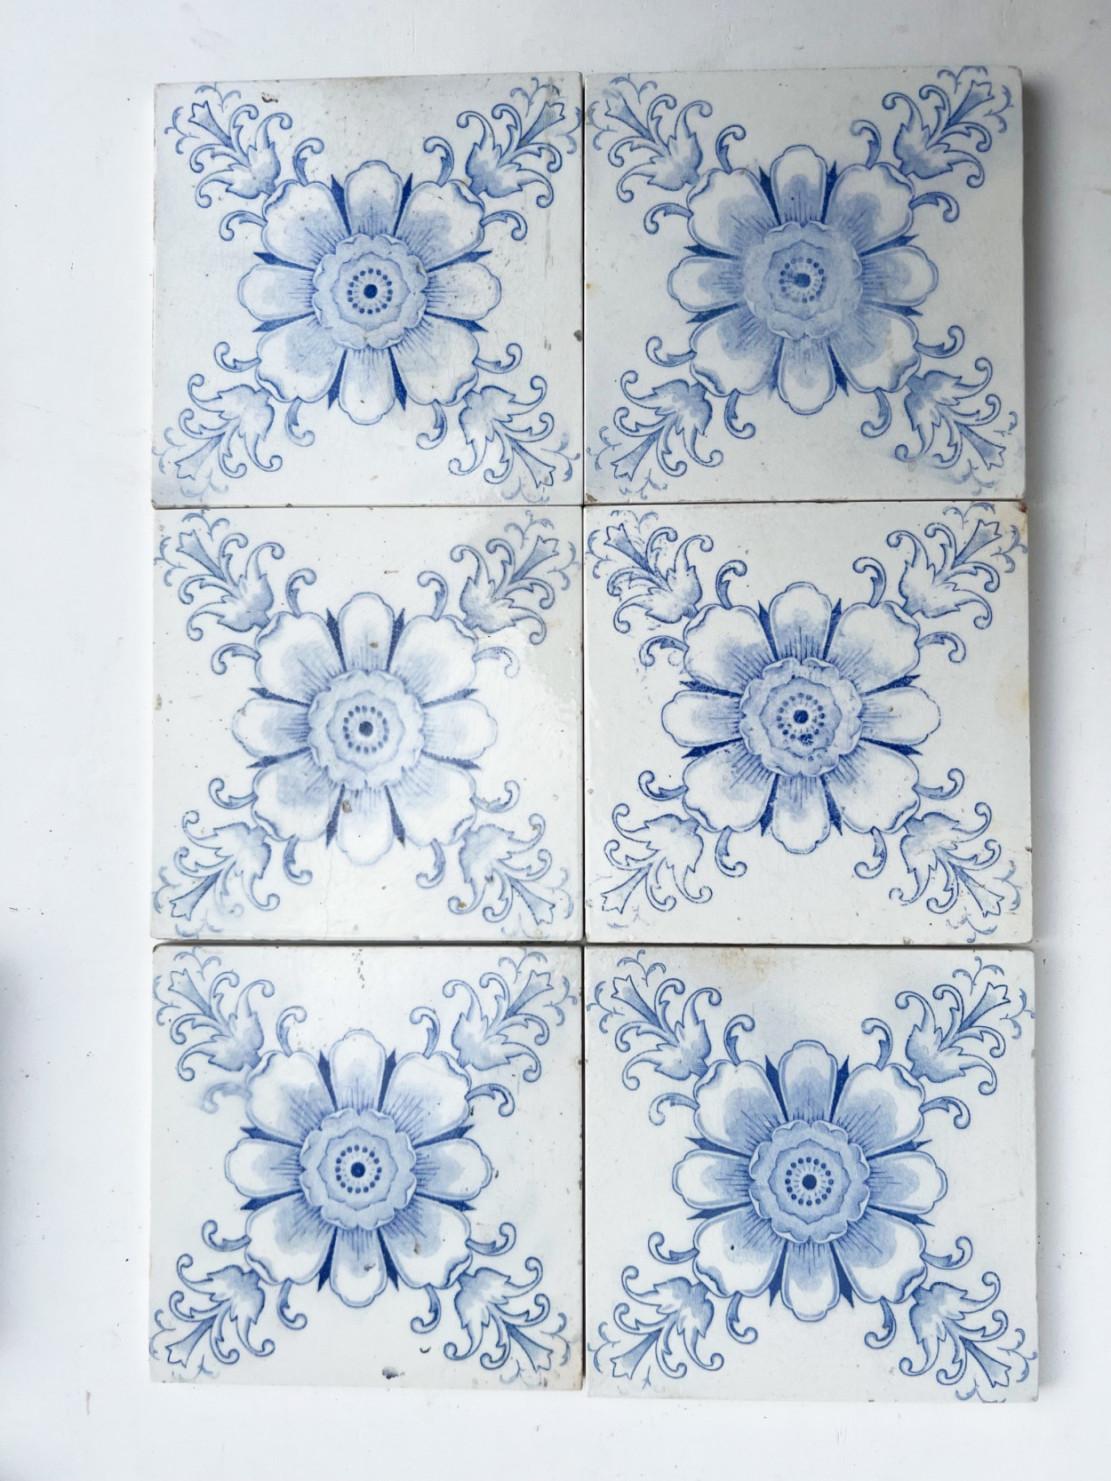 White and Blue Flower Art Deco Glazed Tiles by Le Glaive, 1920 For Sale 3